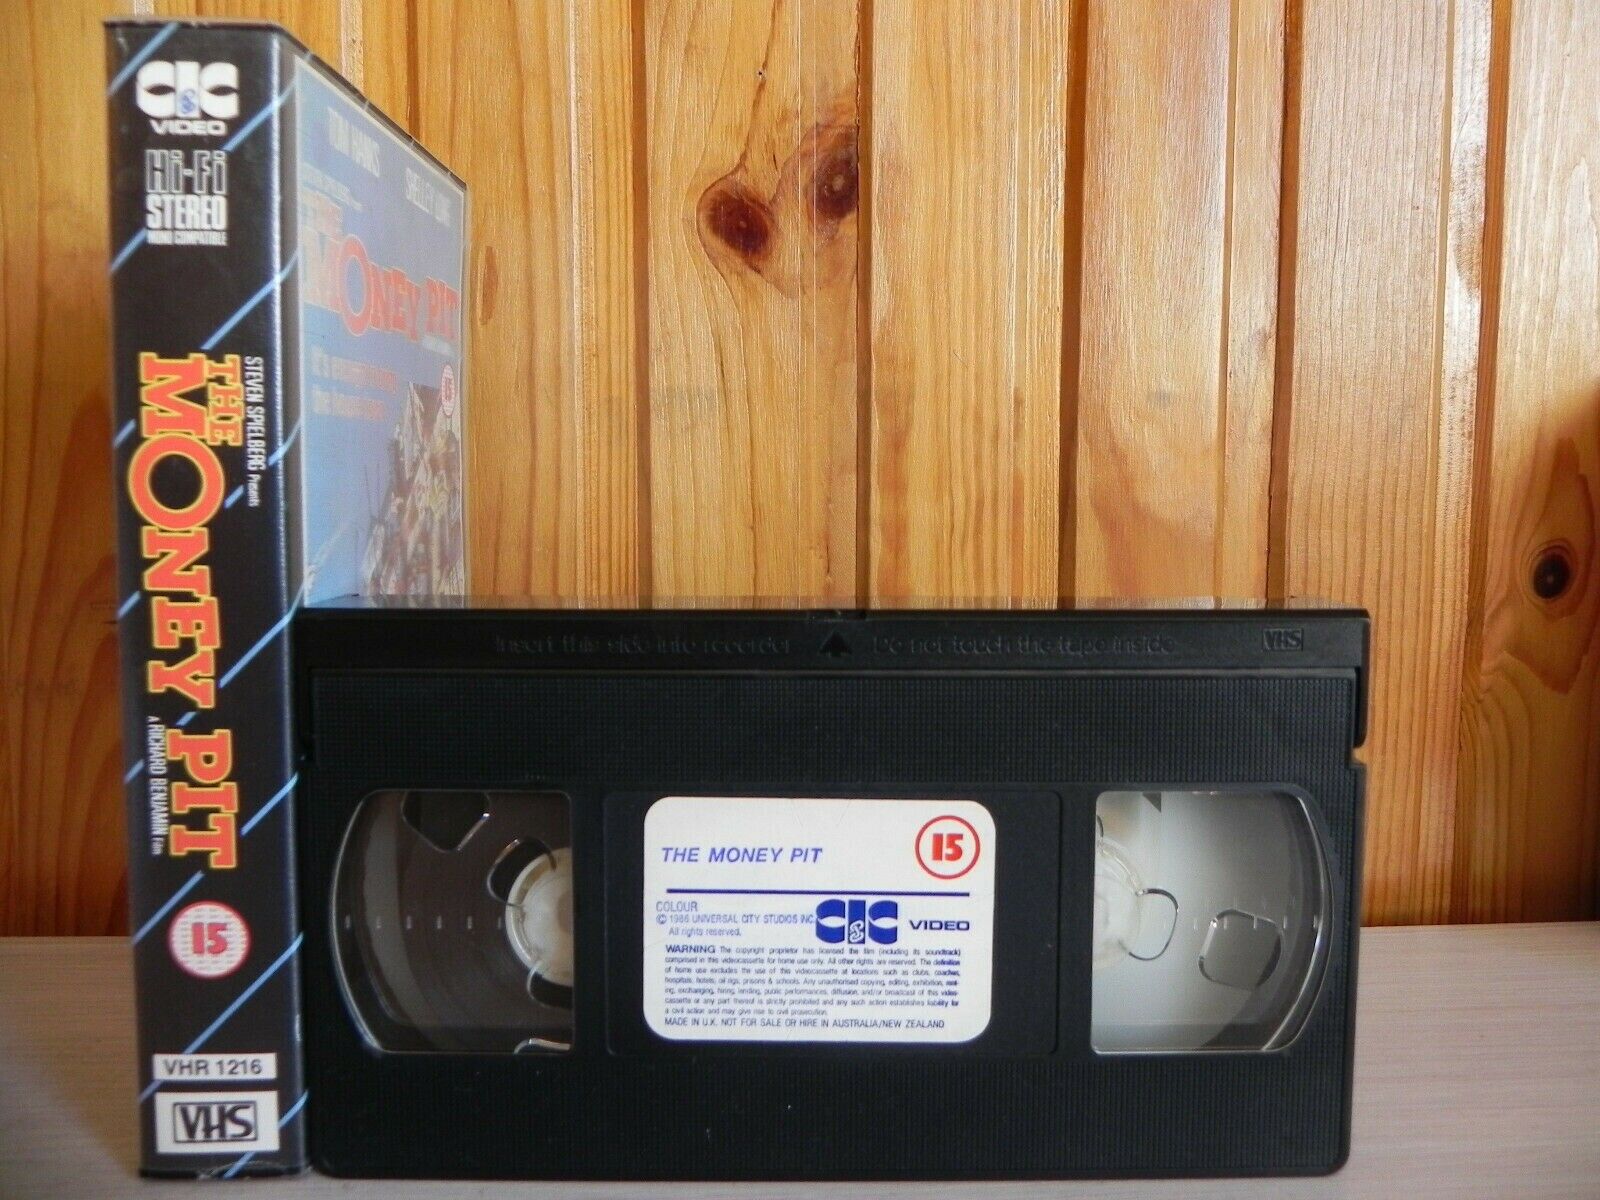 The Money Pit - CIC Video - It's Enough To Bring The House Down - Pal VHS-